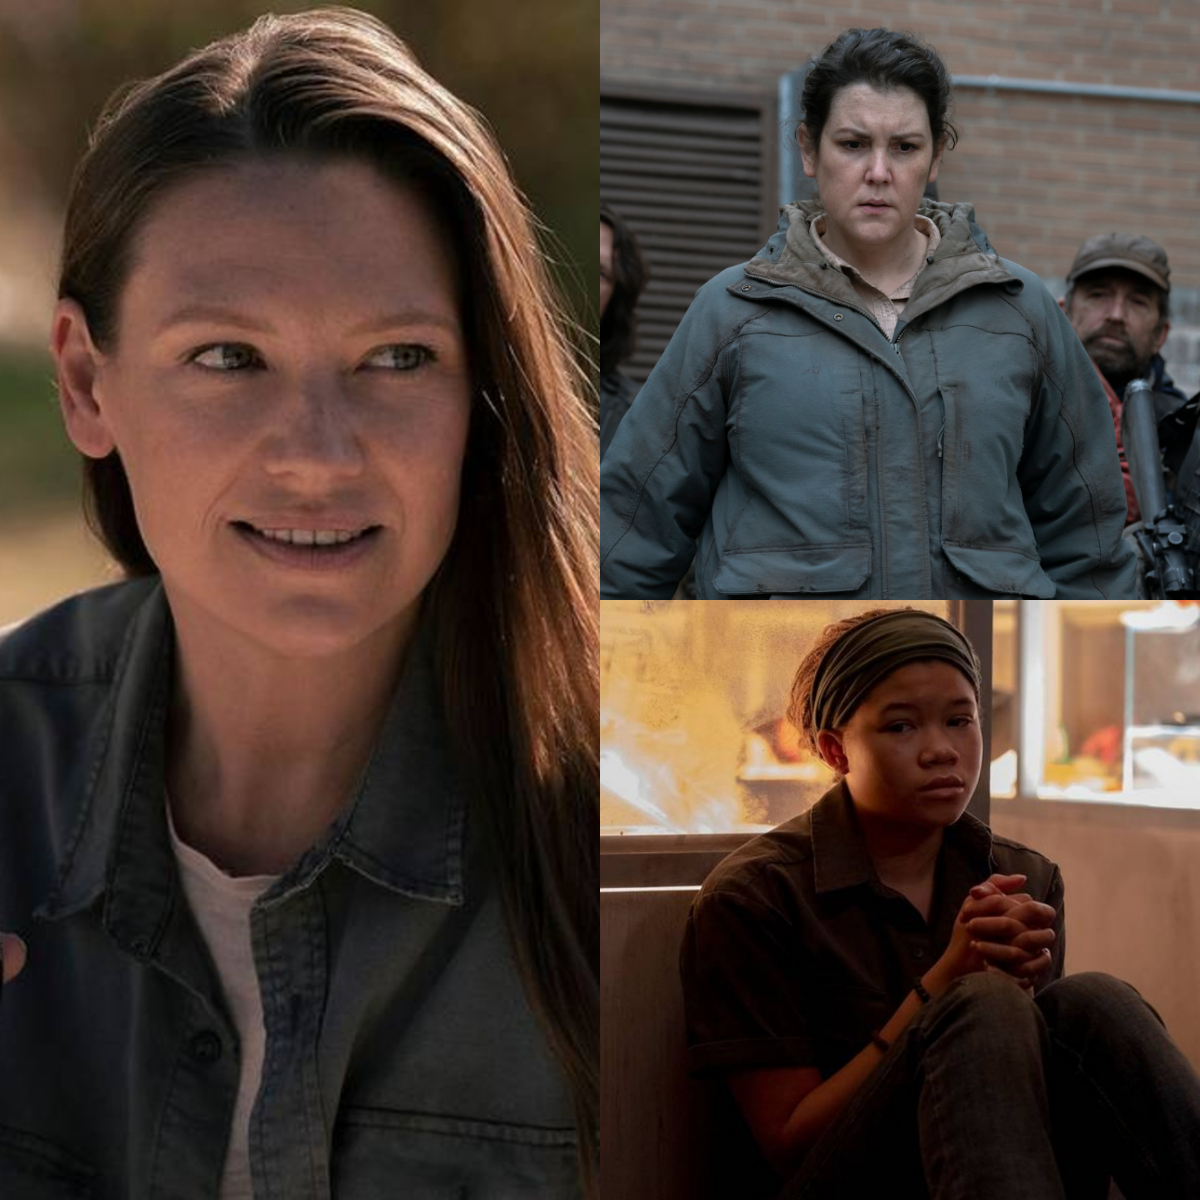 The Last of Us received 4 nominations for Outstanding Guest Actor in a Drama Series and 3 nominations for Guest Actress in a Drama Series

- Murray Bartlett  
 - Lamar Johnson 
- Nick Offerman 
- Keivonn Woodard 

- Anna Torv 
- Melanie Lynskey
- Storm Reid 

#Emmys2023